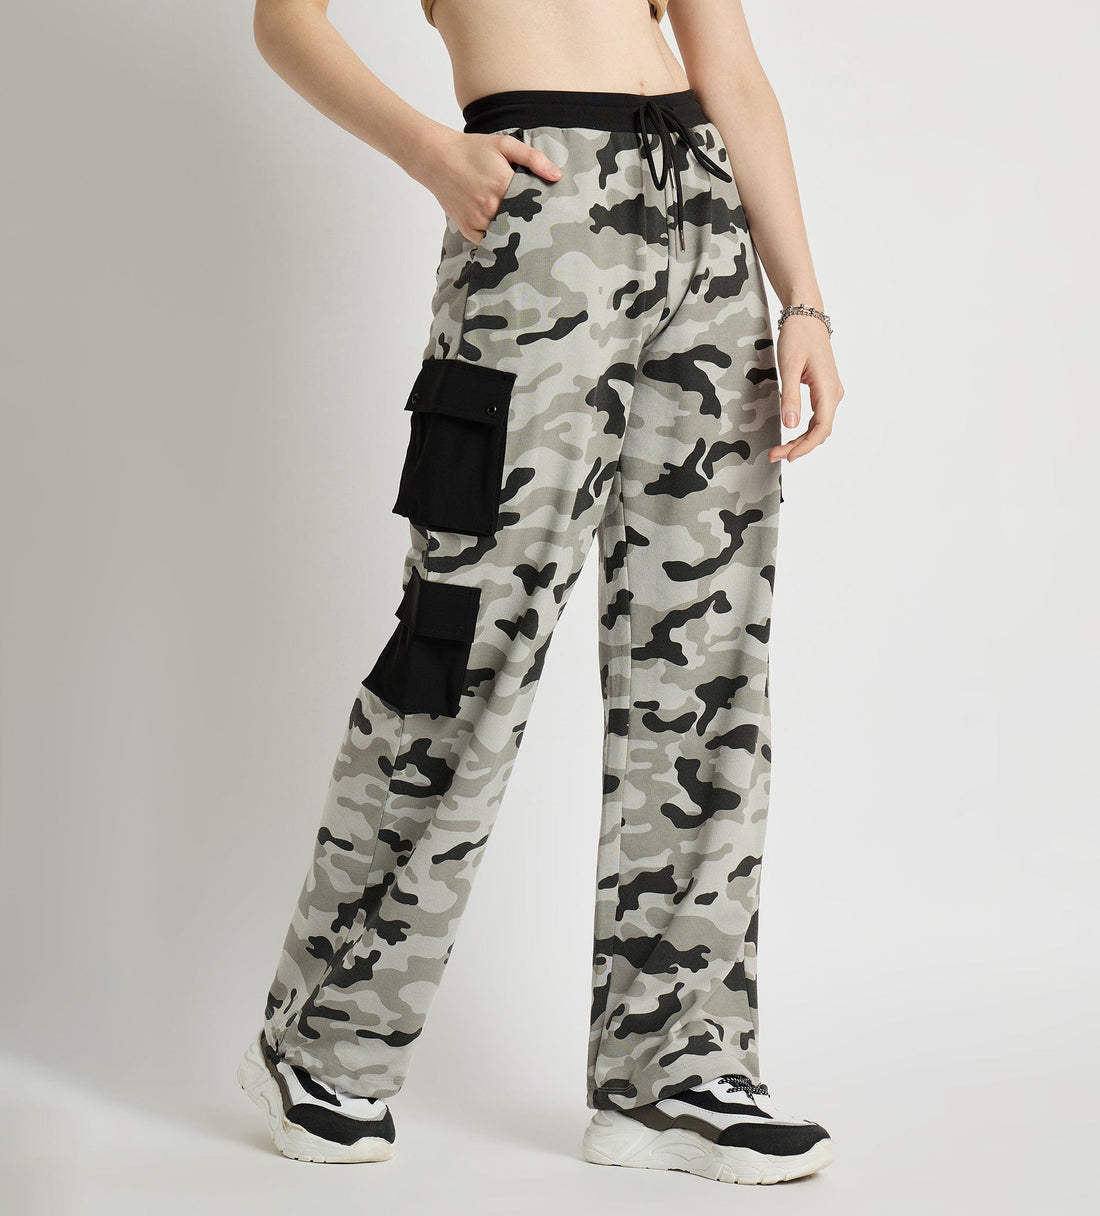 Trackpants Open Bottom Trackpant All Weather Camo Print Cotton Cargo Pants